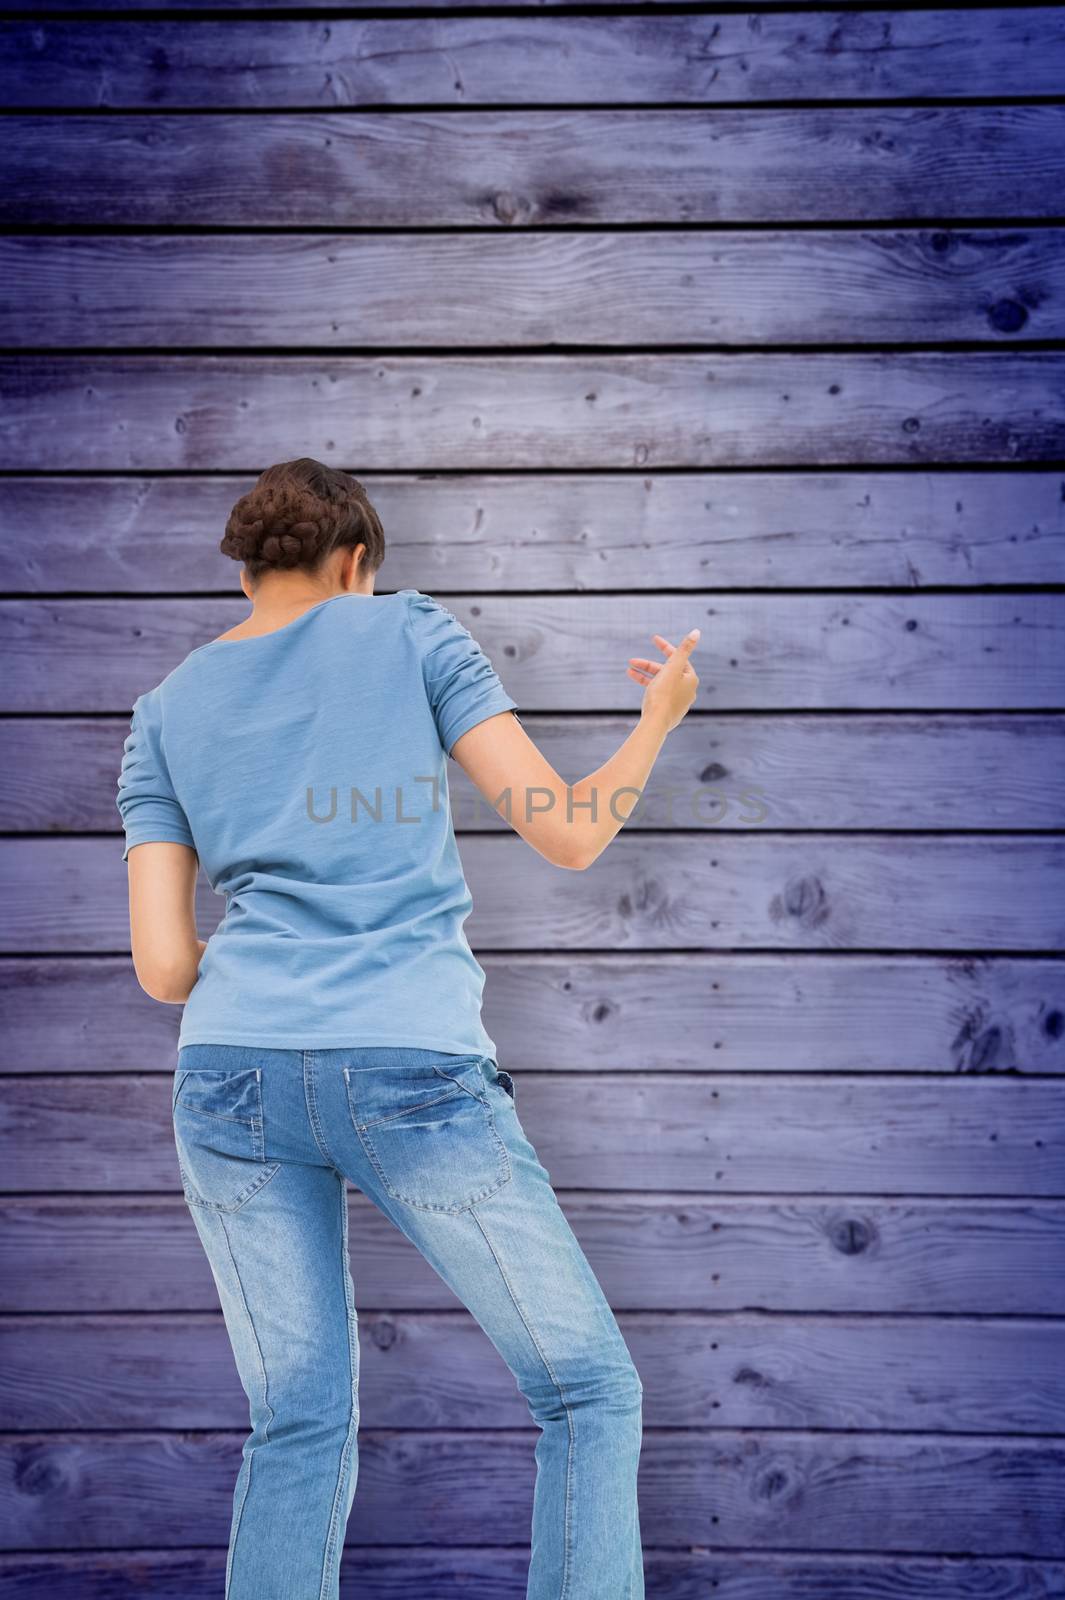 Pretty brunette playing air guitar against wooden planks background